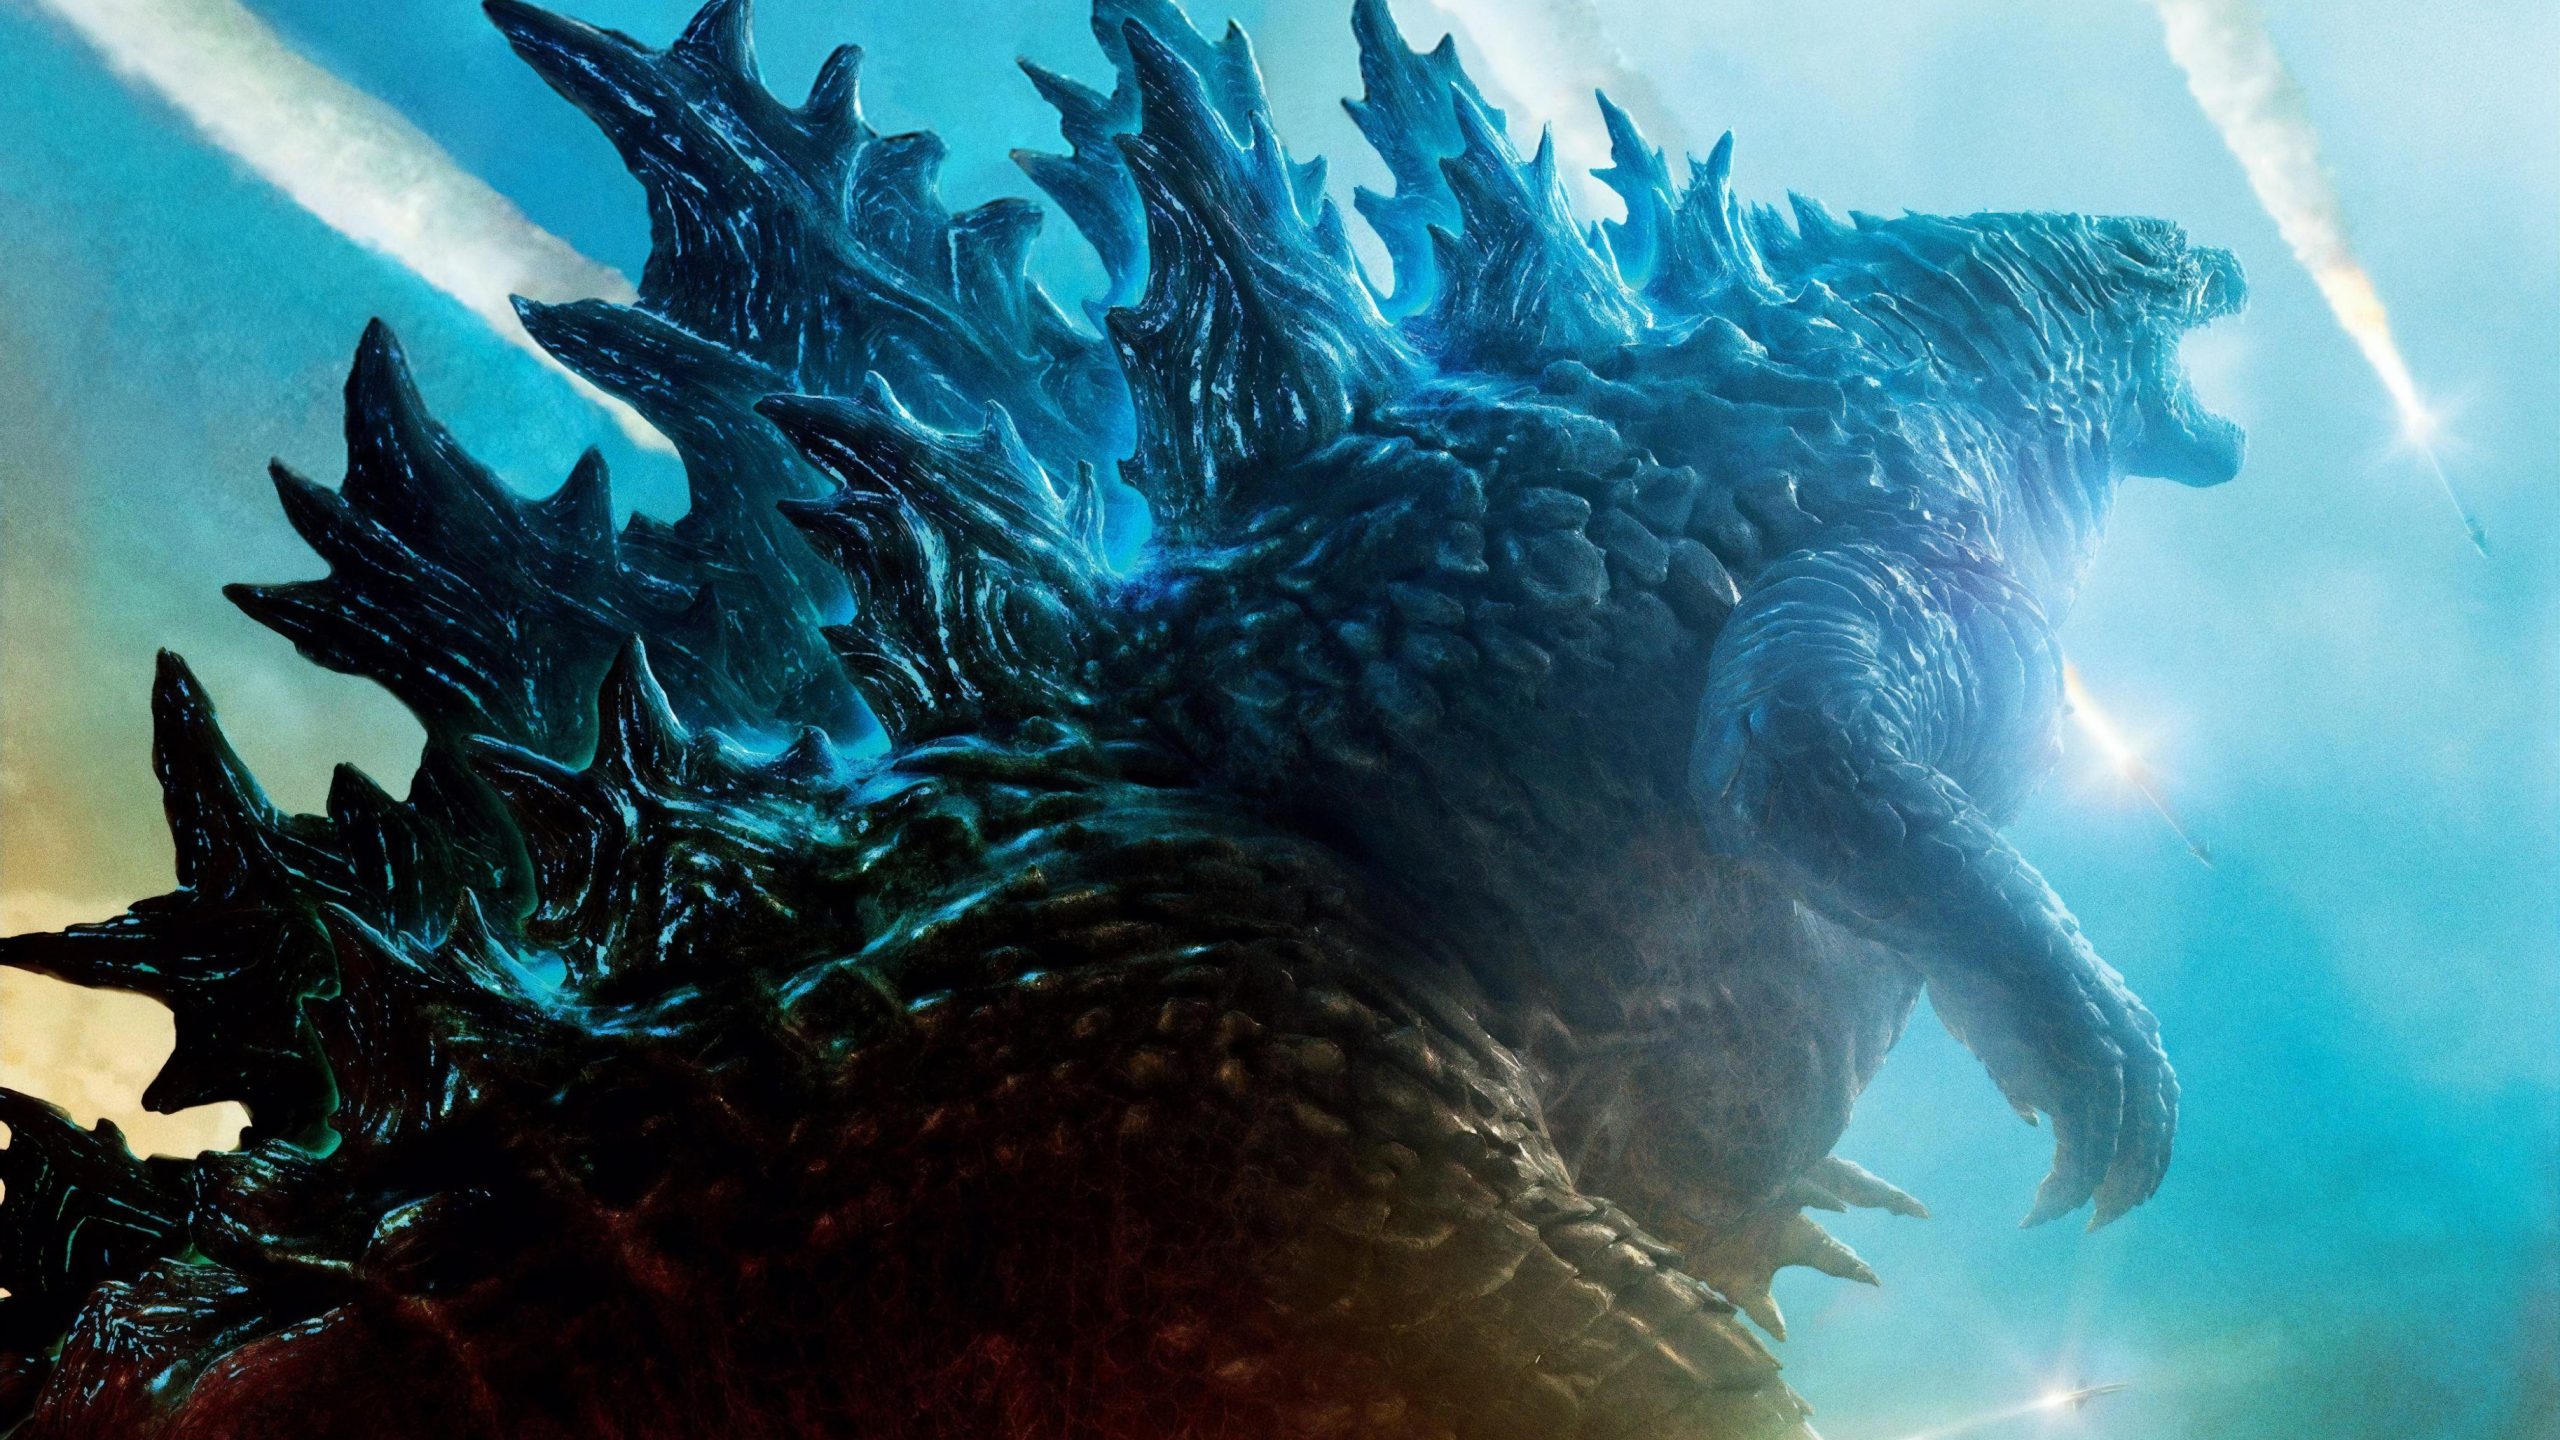 Godzilla: King of the Monsters Wallpapers, Pictures, Images